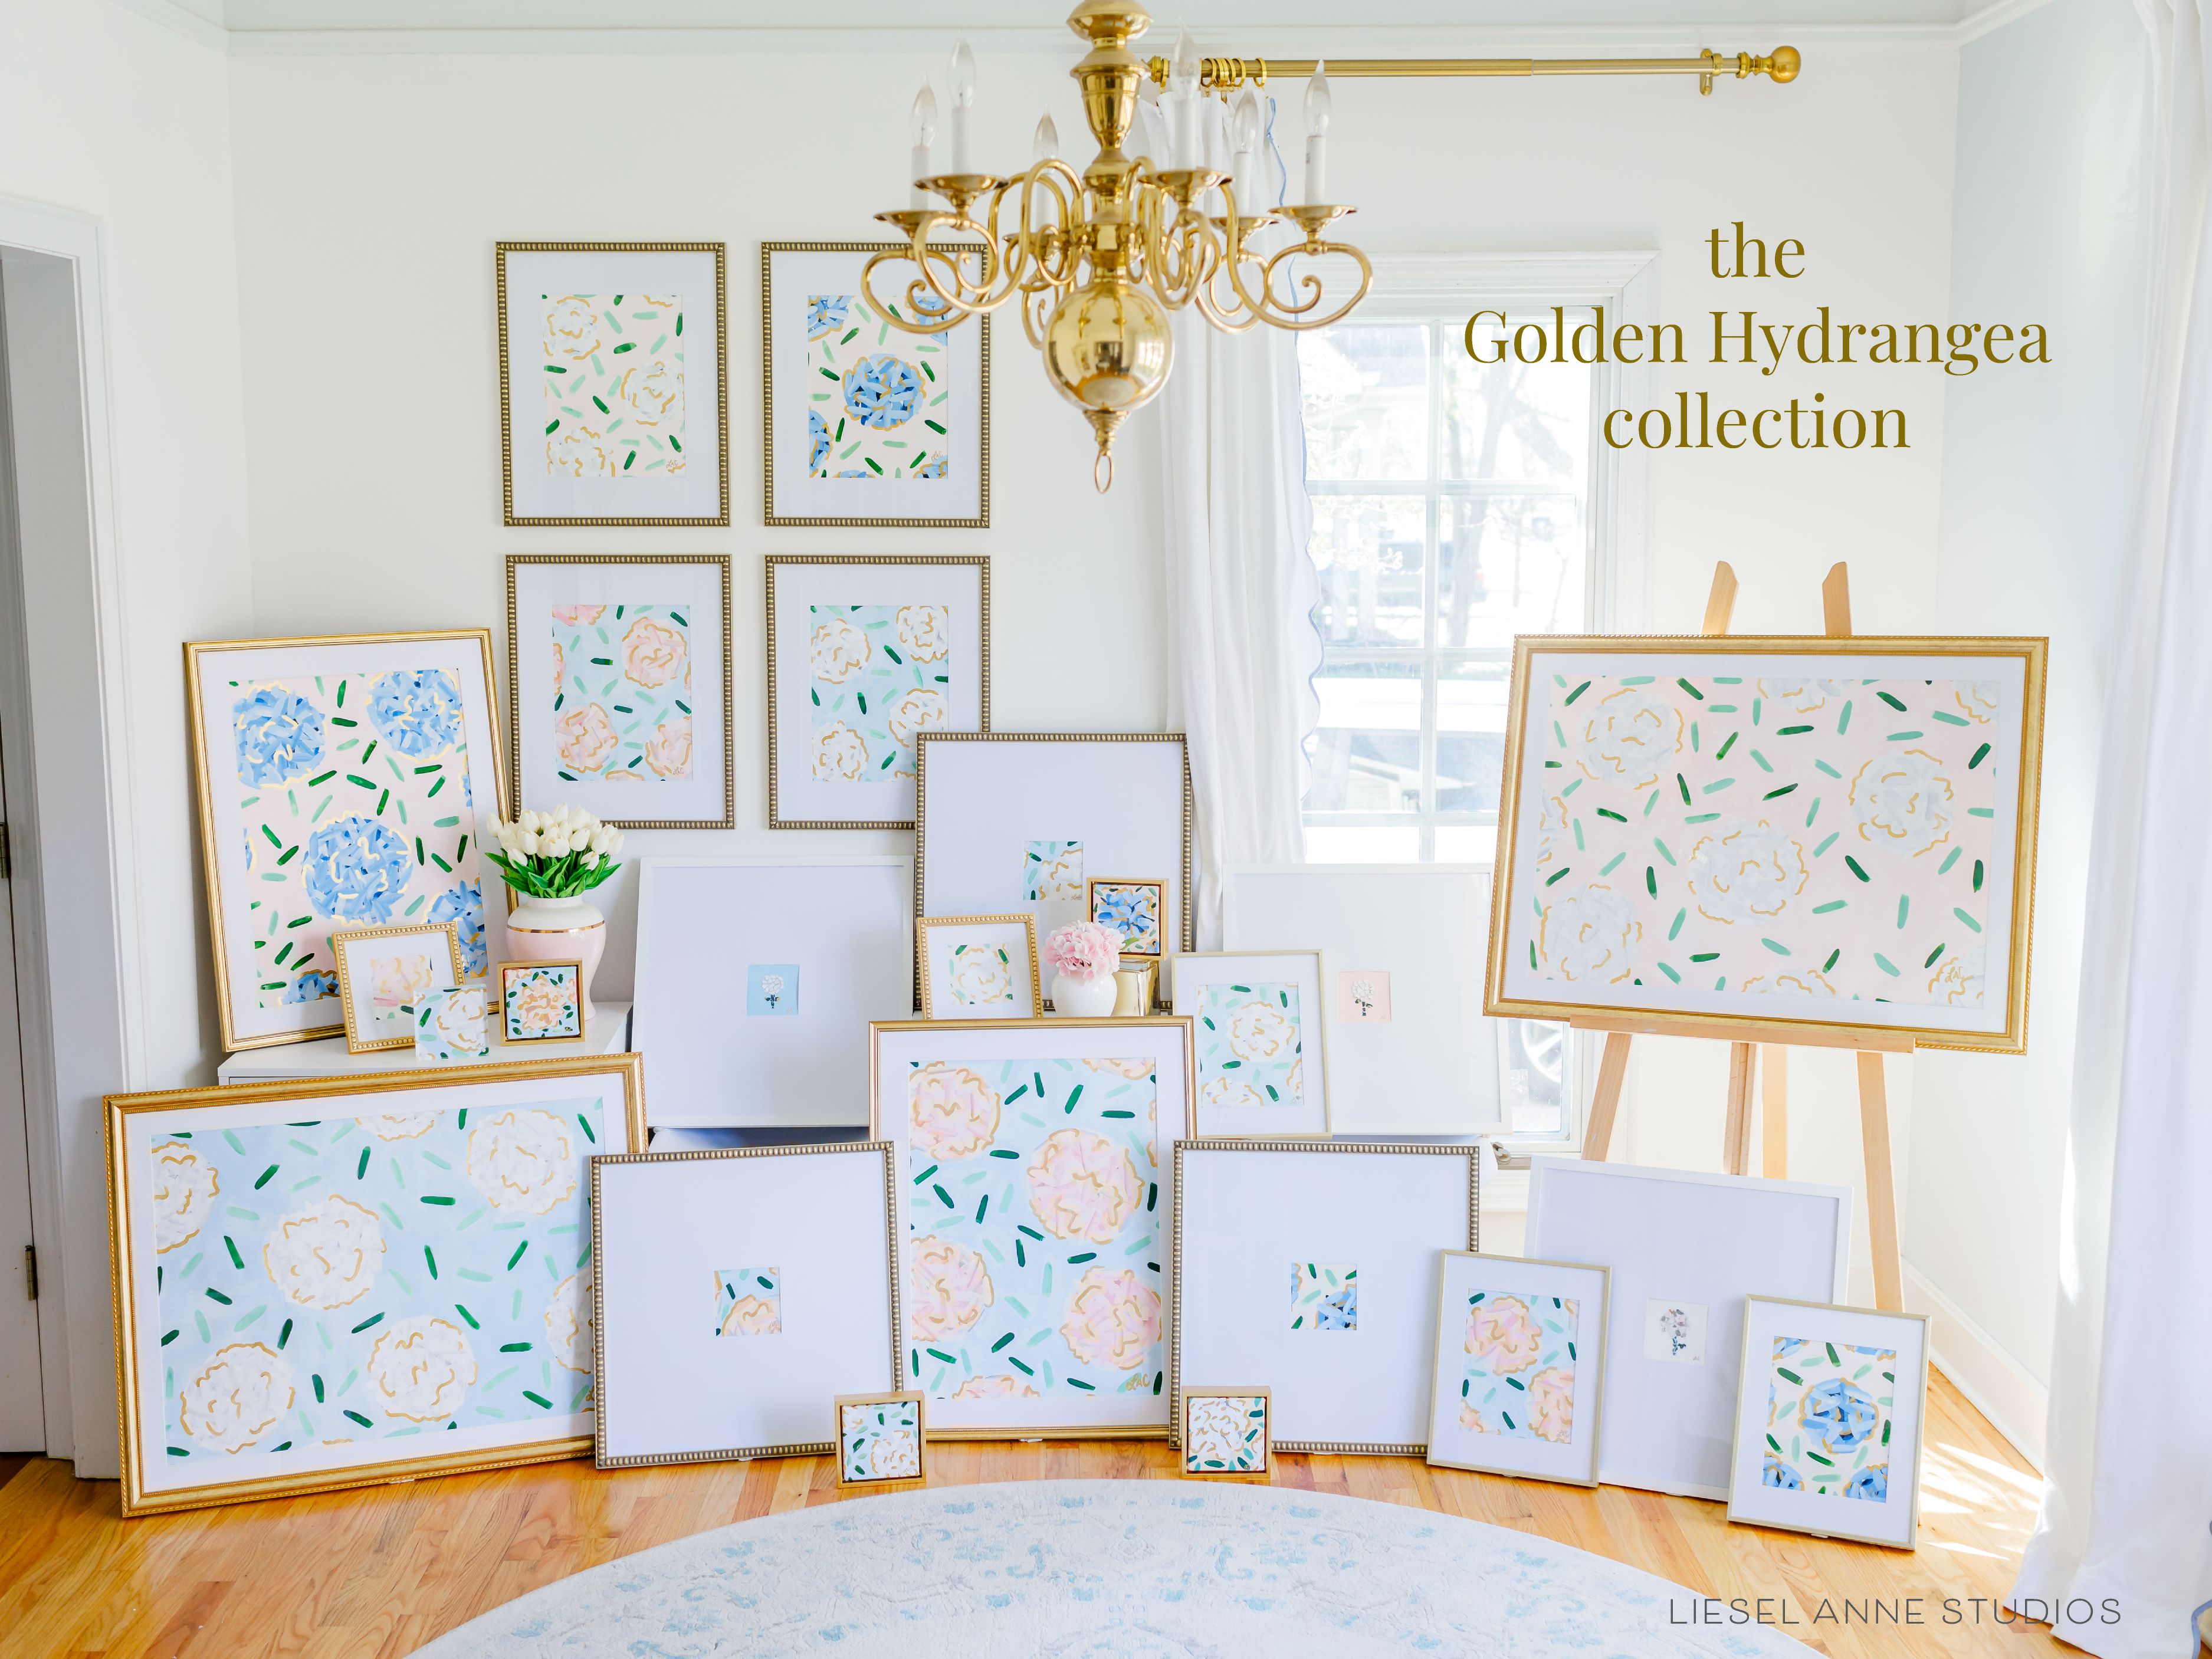 Golden Hydrangea Mini | Blush & Blue XX-Original artwork measures 5"x5" | Hand-Painted with gouache on cold press watercolor paper | Matted and framed in gold wood frame sized 20"x20" | Glare-resistant glass | Hanging hardware included | Features our signature Golden Hydrangea design with a pale pink base, blue hydrangeas and shimmery gold accents | Initialed in gold by the Liesel Anne (the artist) on the front and signed and dated on the back.-The Singing Little Bird